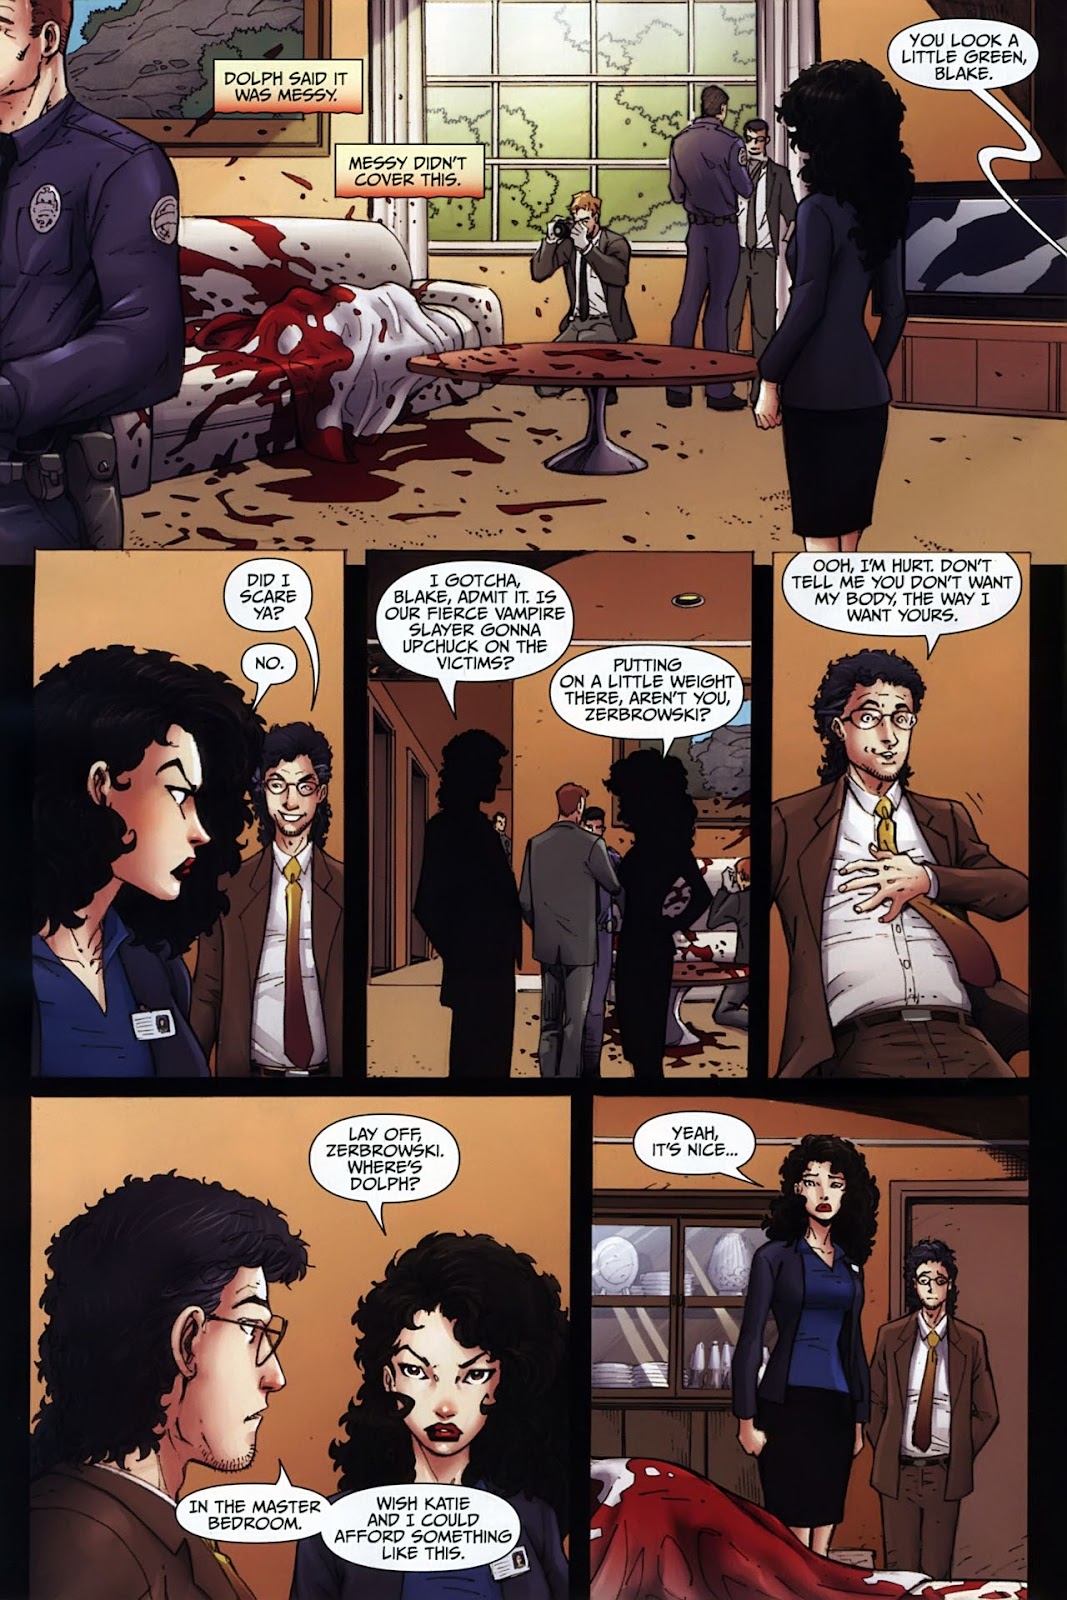 Anita Blake: The Laughing Corpse - Book One issue 1 - Page 17